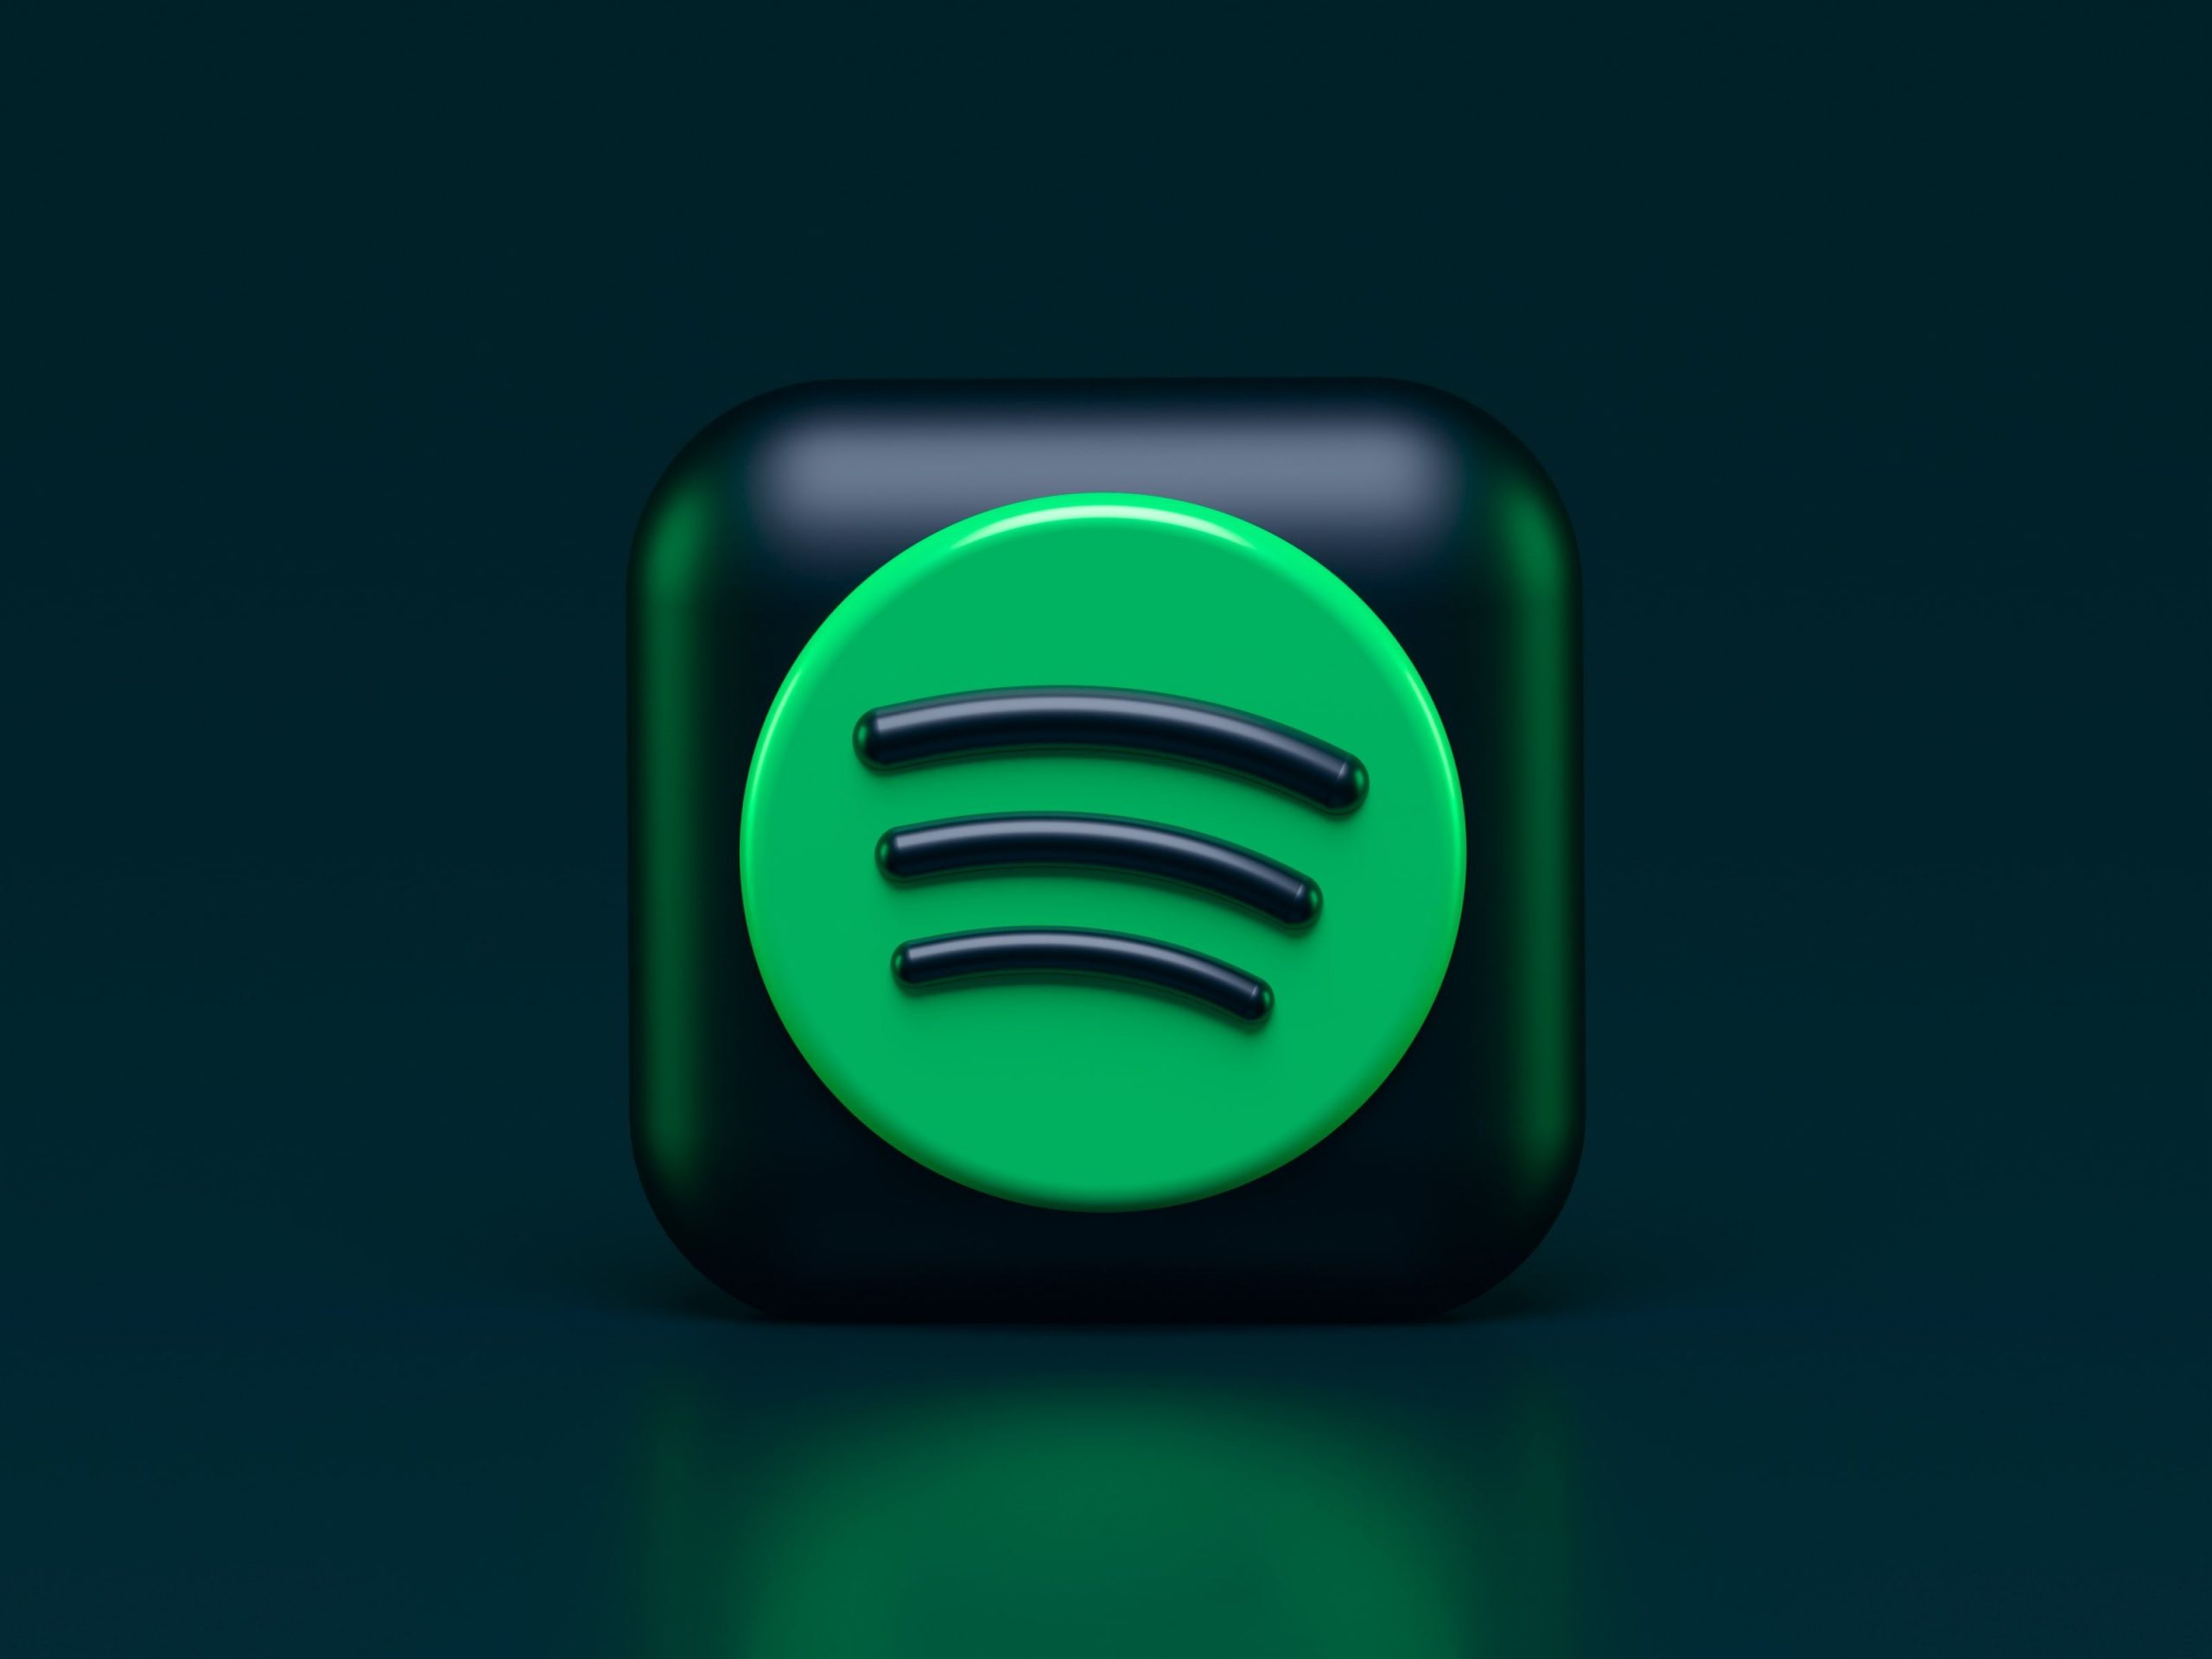 Spotify Wrapped 2022: What is new?